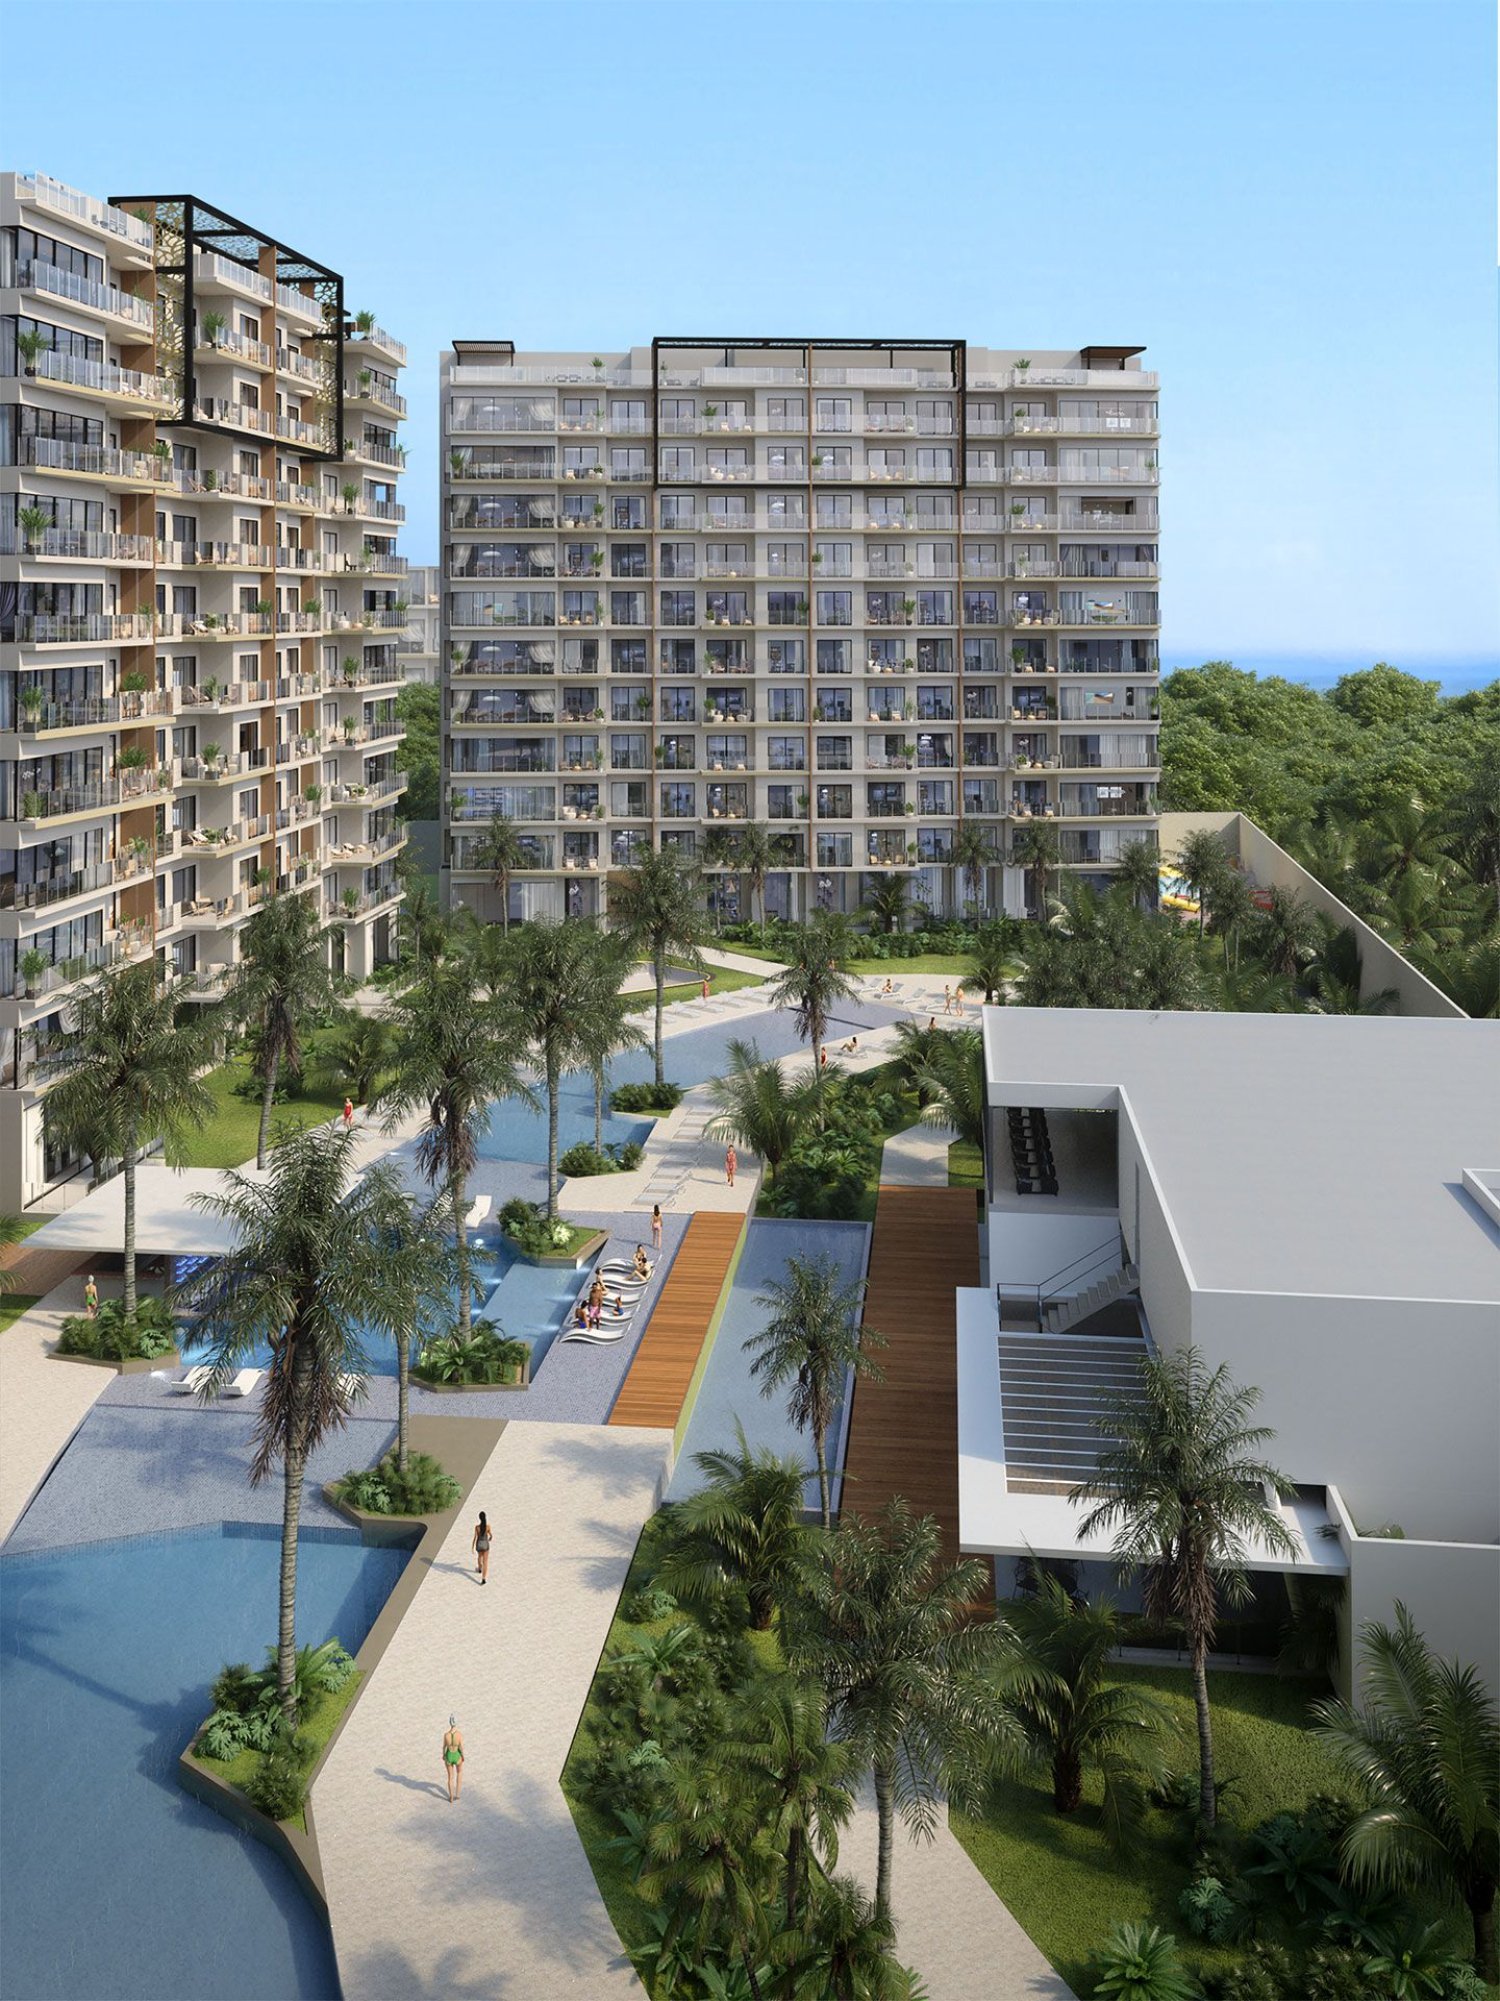 Flats for sale in Cancun, Mexico